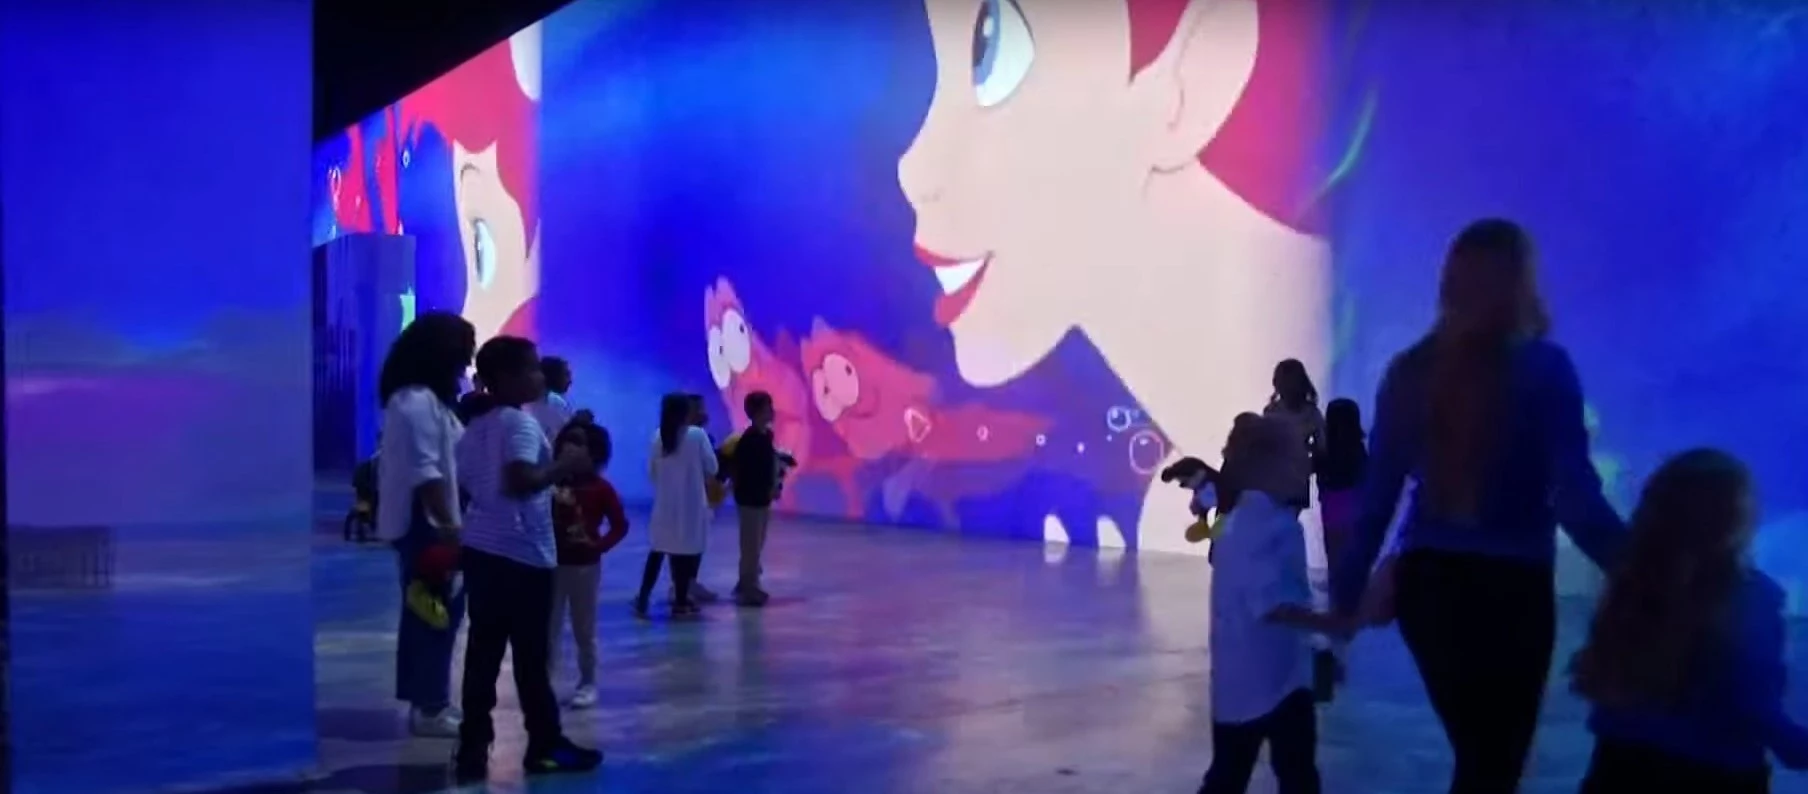 Step Inside the Magical World of Disney Movies in Boston pic